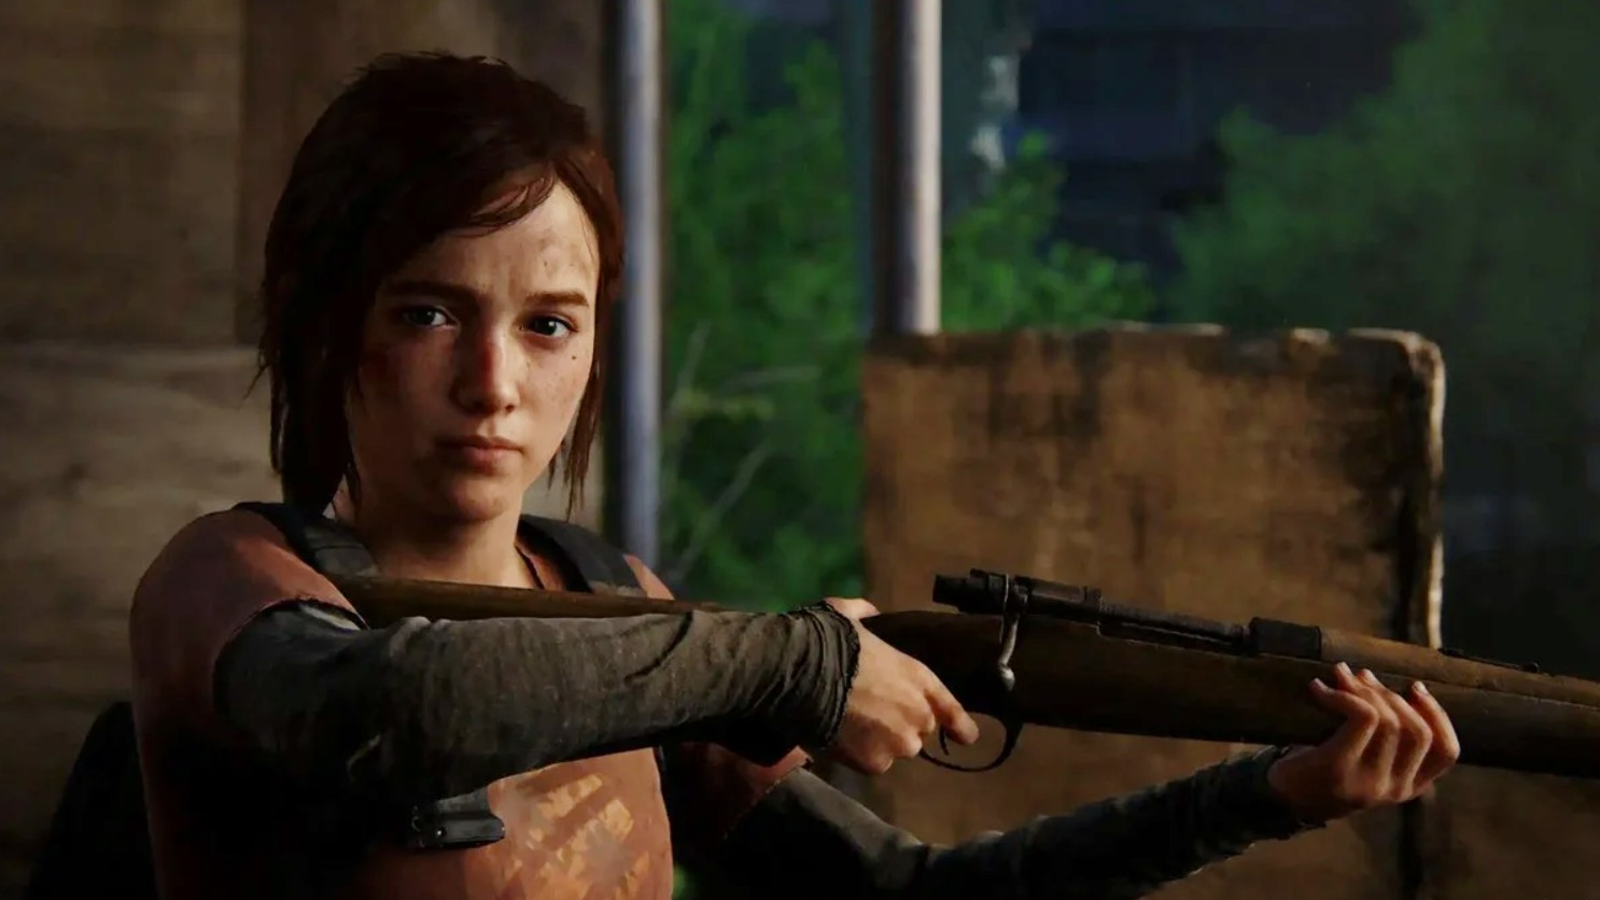 The Last of Us Part I PC pre-order guide: release date, Steam price, and  more